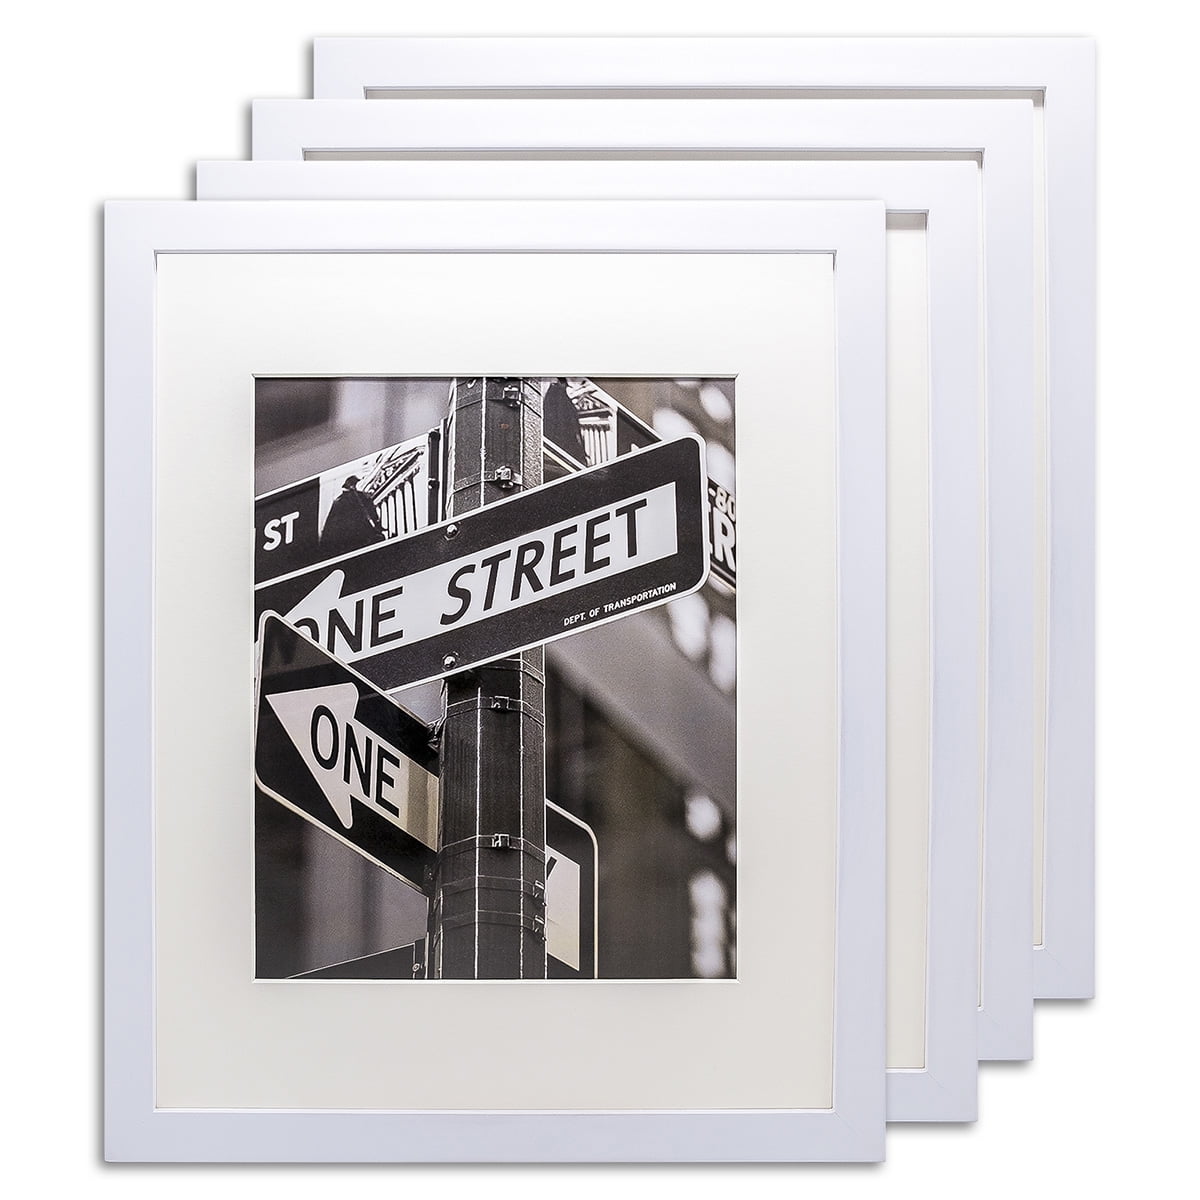 with White Core Mat Boards for 11x14 Photo The Display Guys~ 16x20 Inch White Picture Frame Made of Solid Pine Wood and Tempered Glass,Luxury Made Affordable Collage Mat Board for 4-5x7 Photo